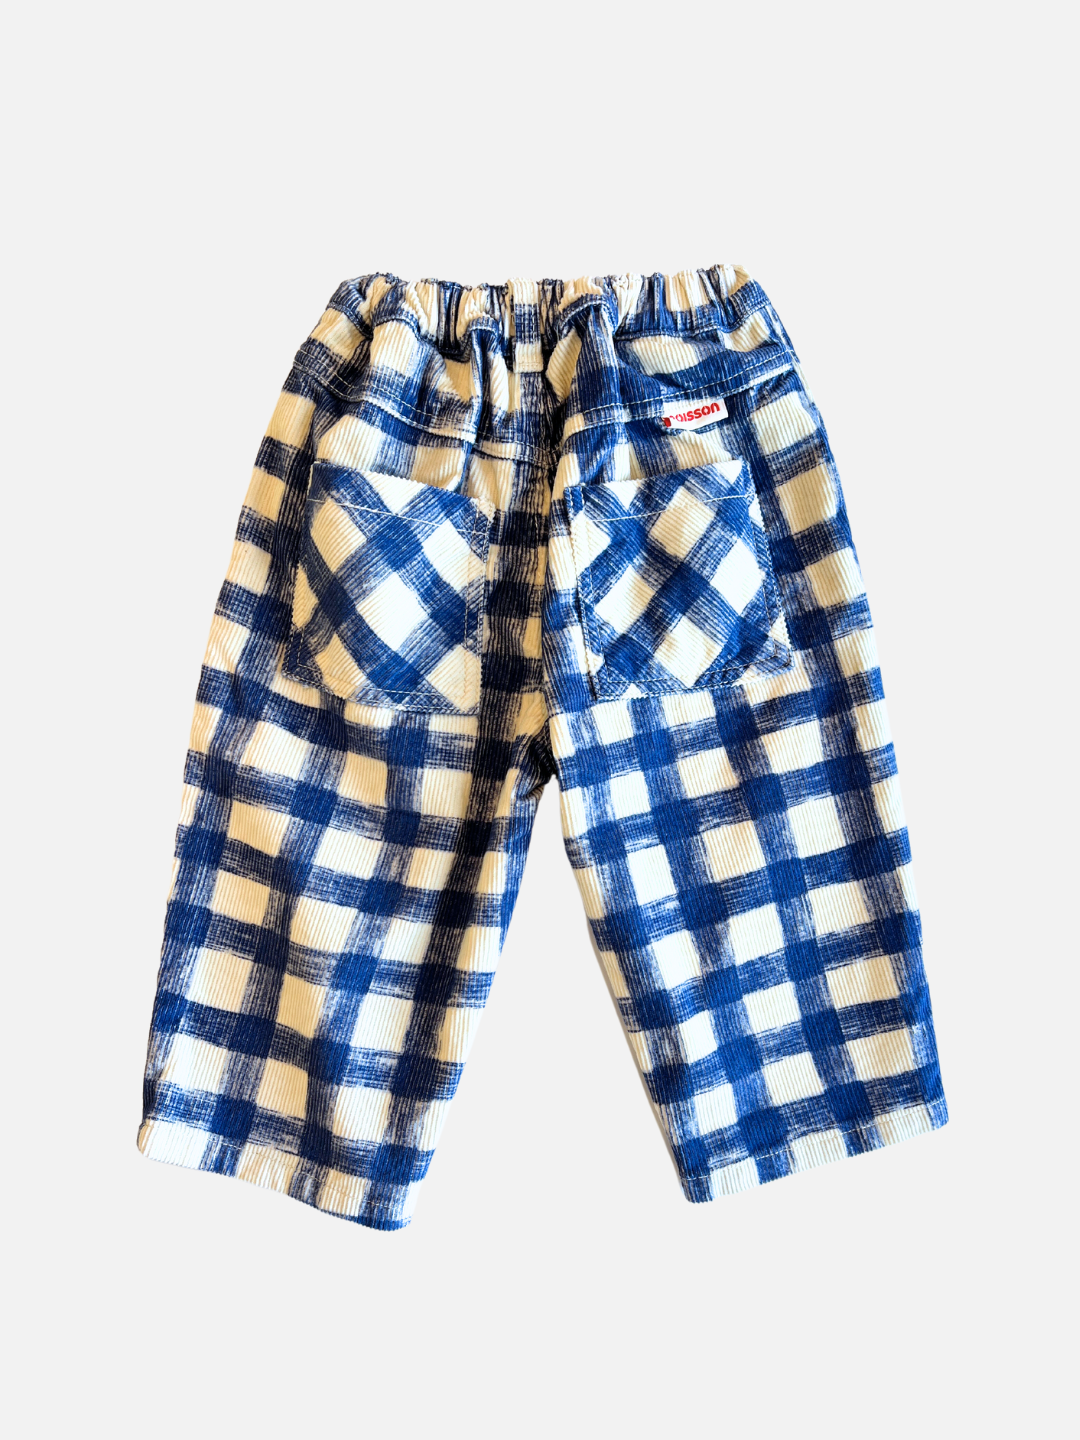 Back view of kids corduroy trousers in white with a large blue grid check pattern.